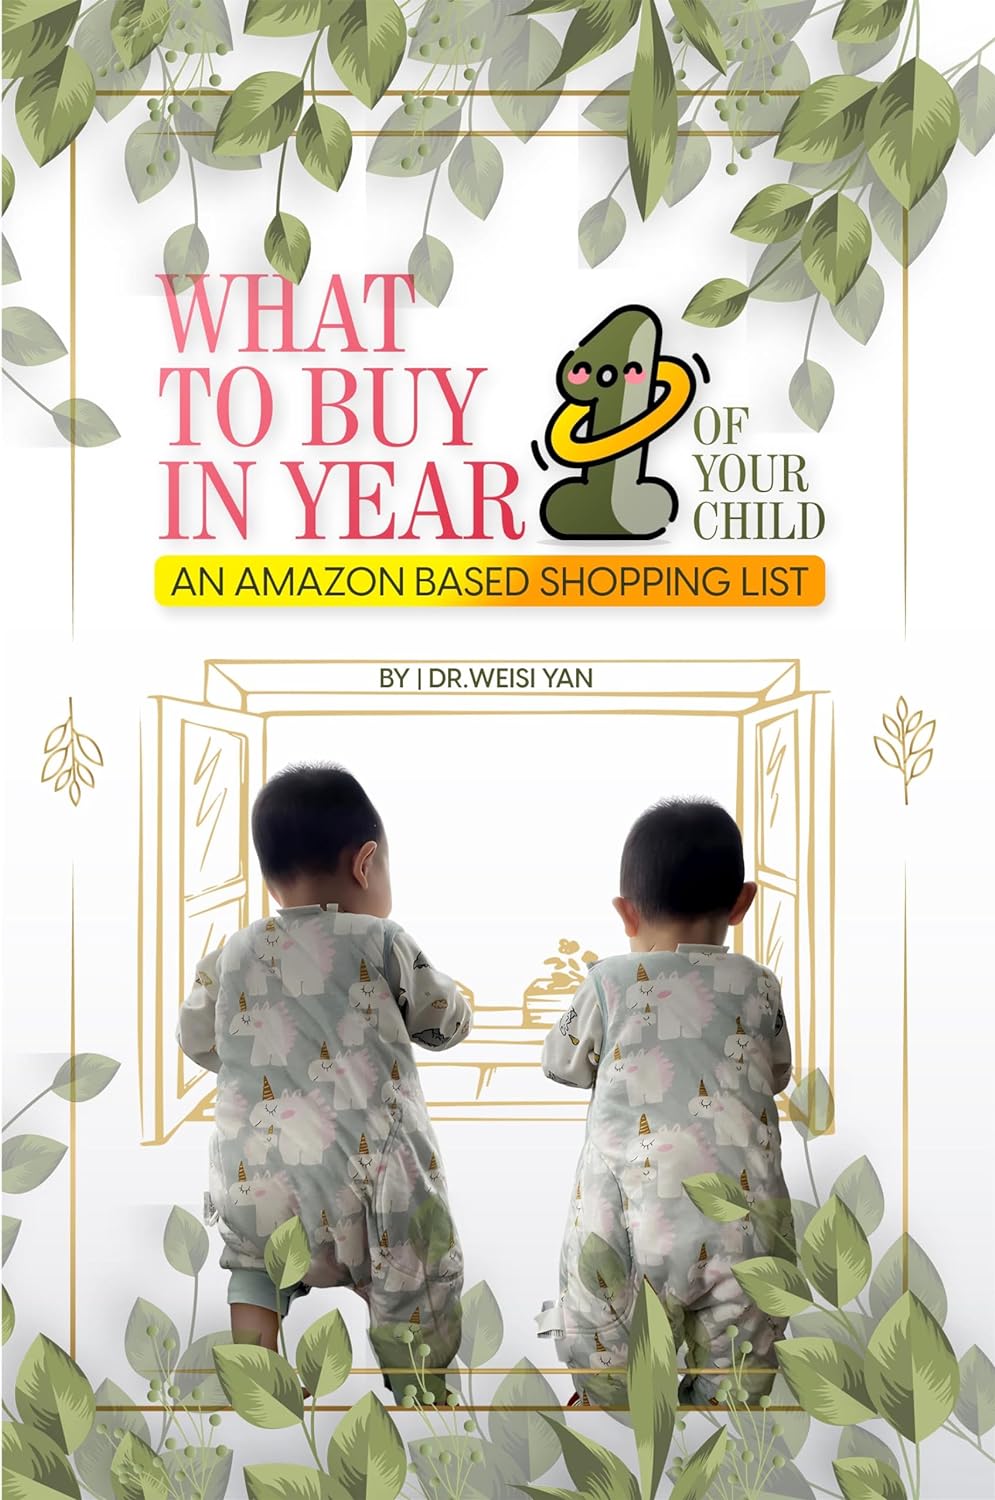 What to buy in year 1 of your child, an Amazon based shopping list